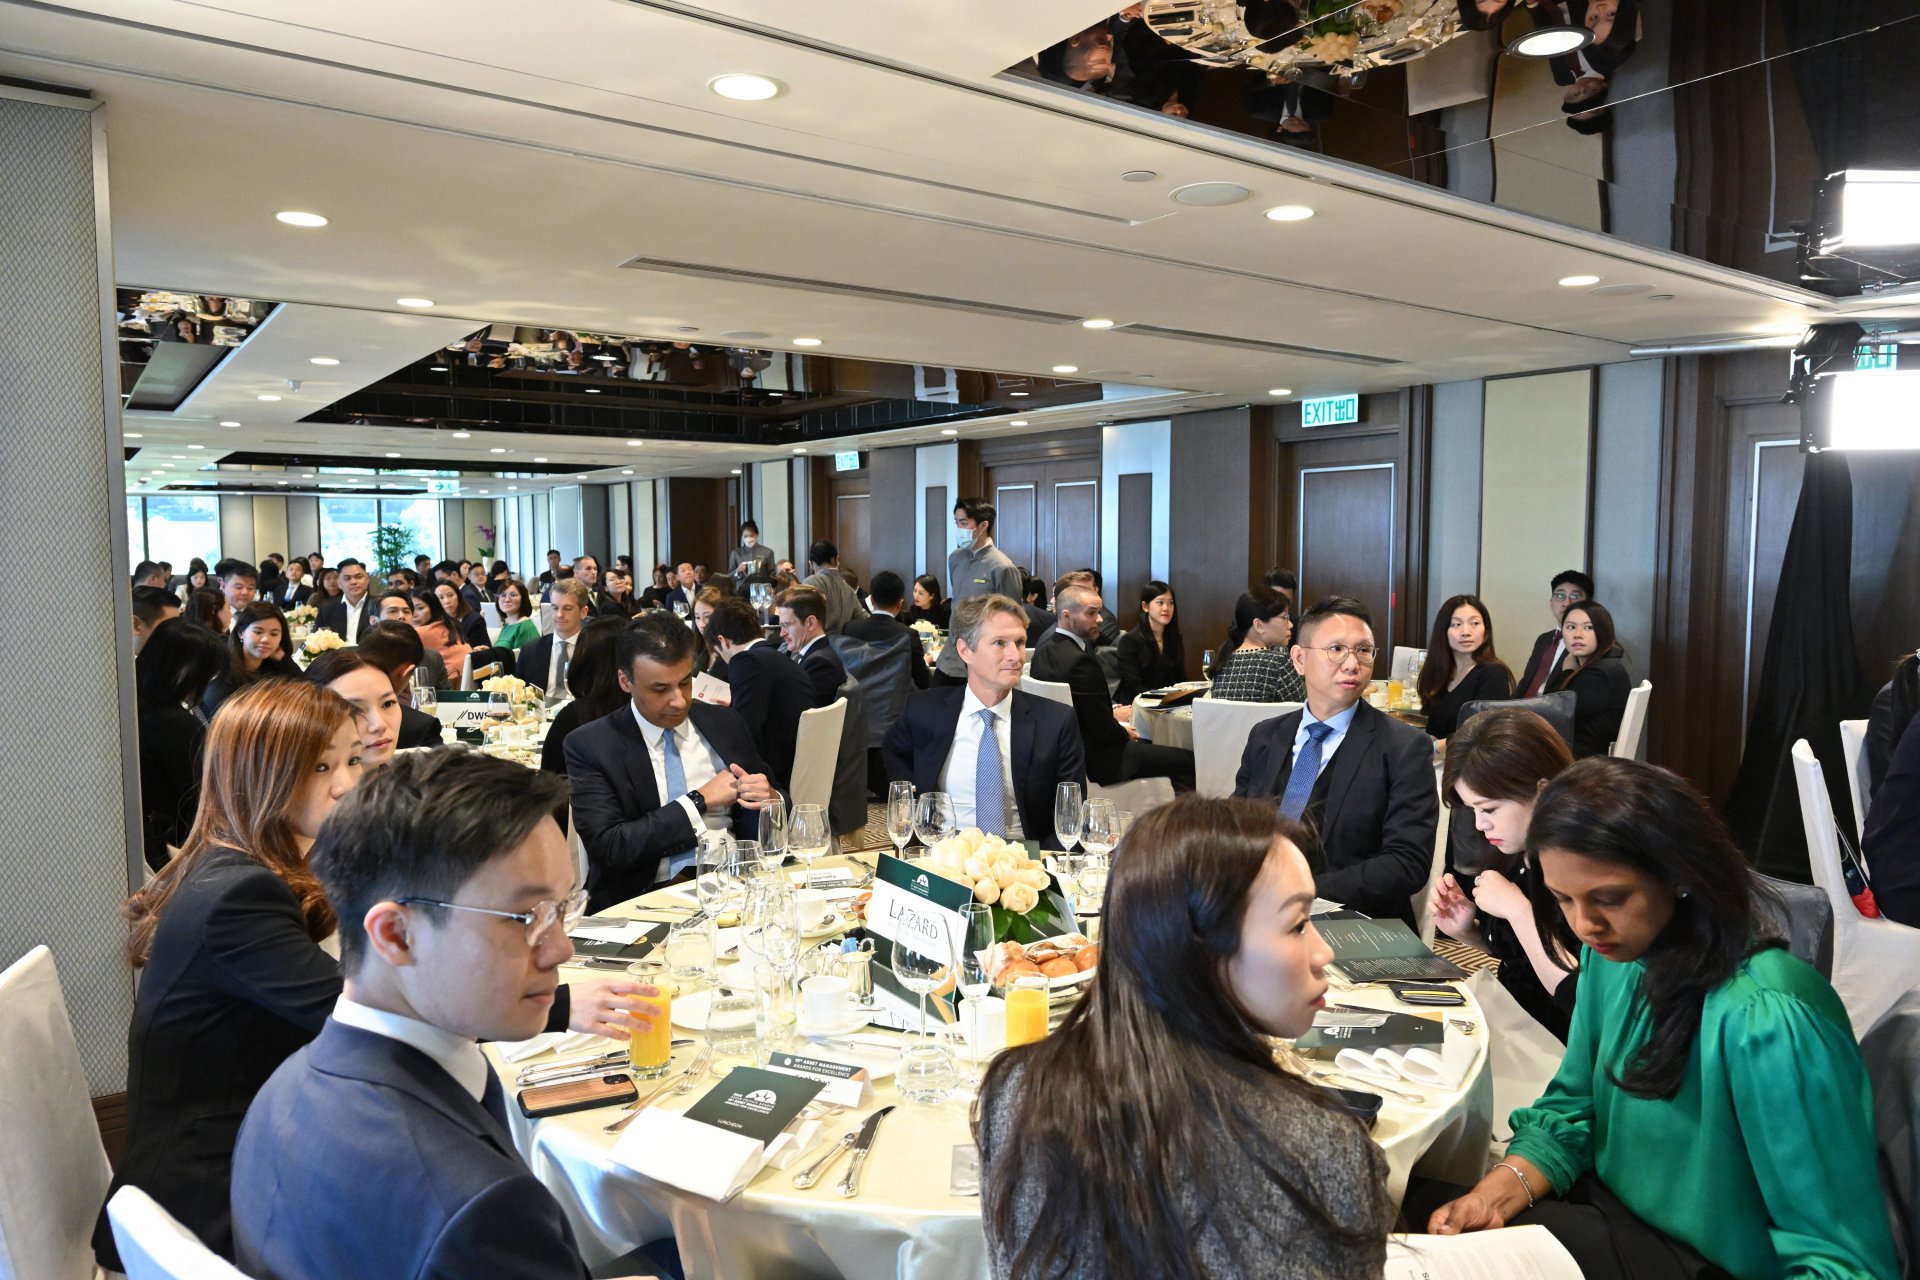 The 10th Asset Management Awards for Excellence hosted over 100 attendees from winning asset managers and VIP fund selector representatives from Asia's leading private banks